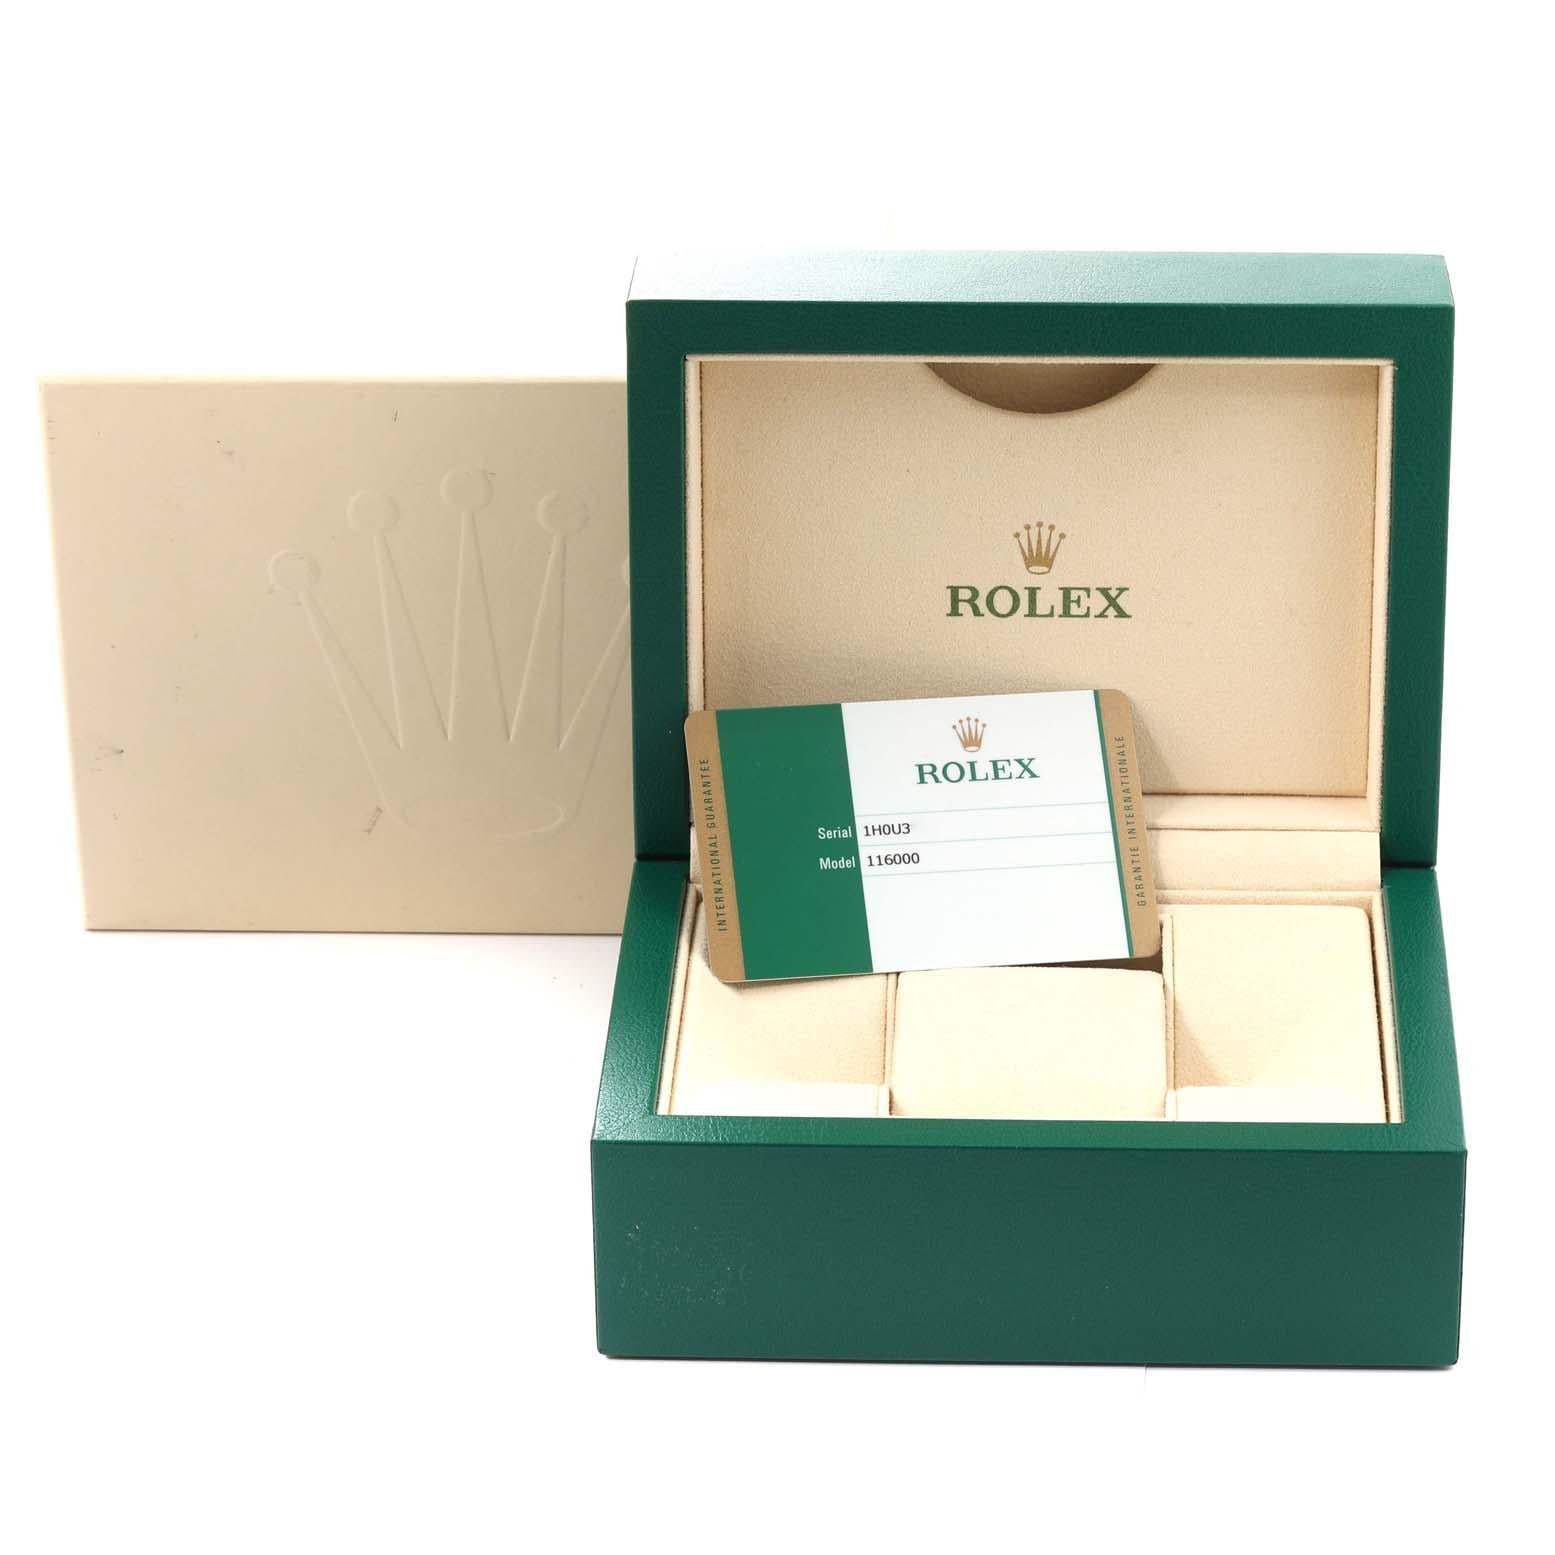 Rolex Oyster Perpetual 36 White Grape Dial Steel Mens Watch 116000 Box Card For Sale 6